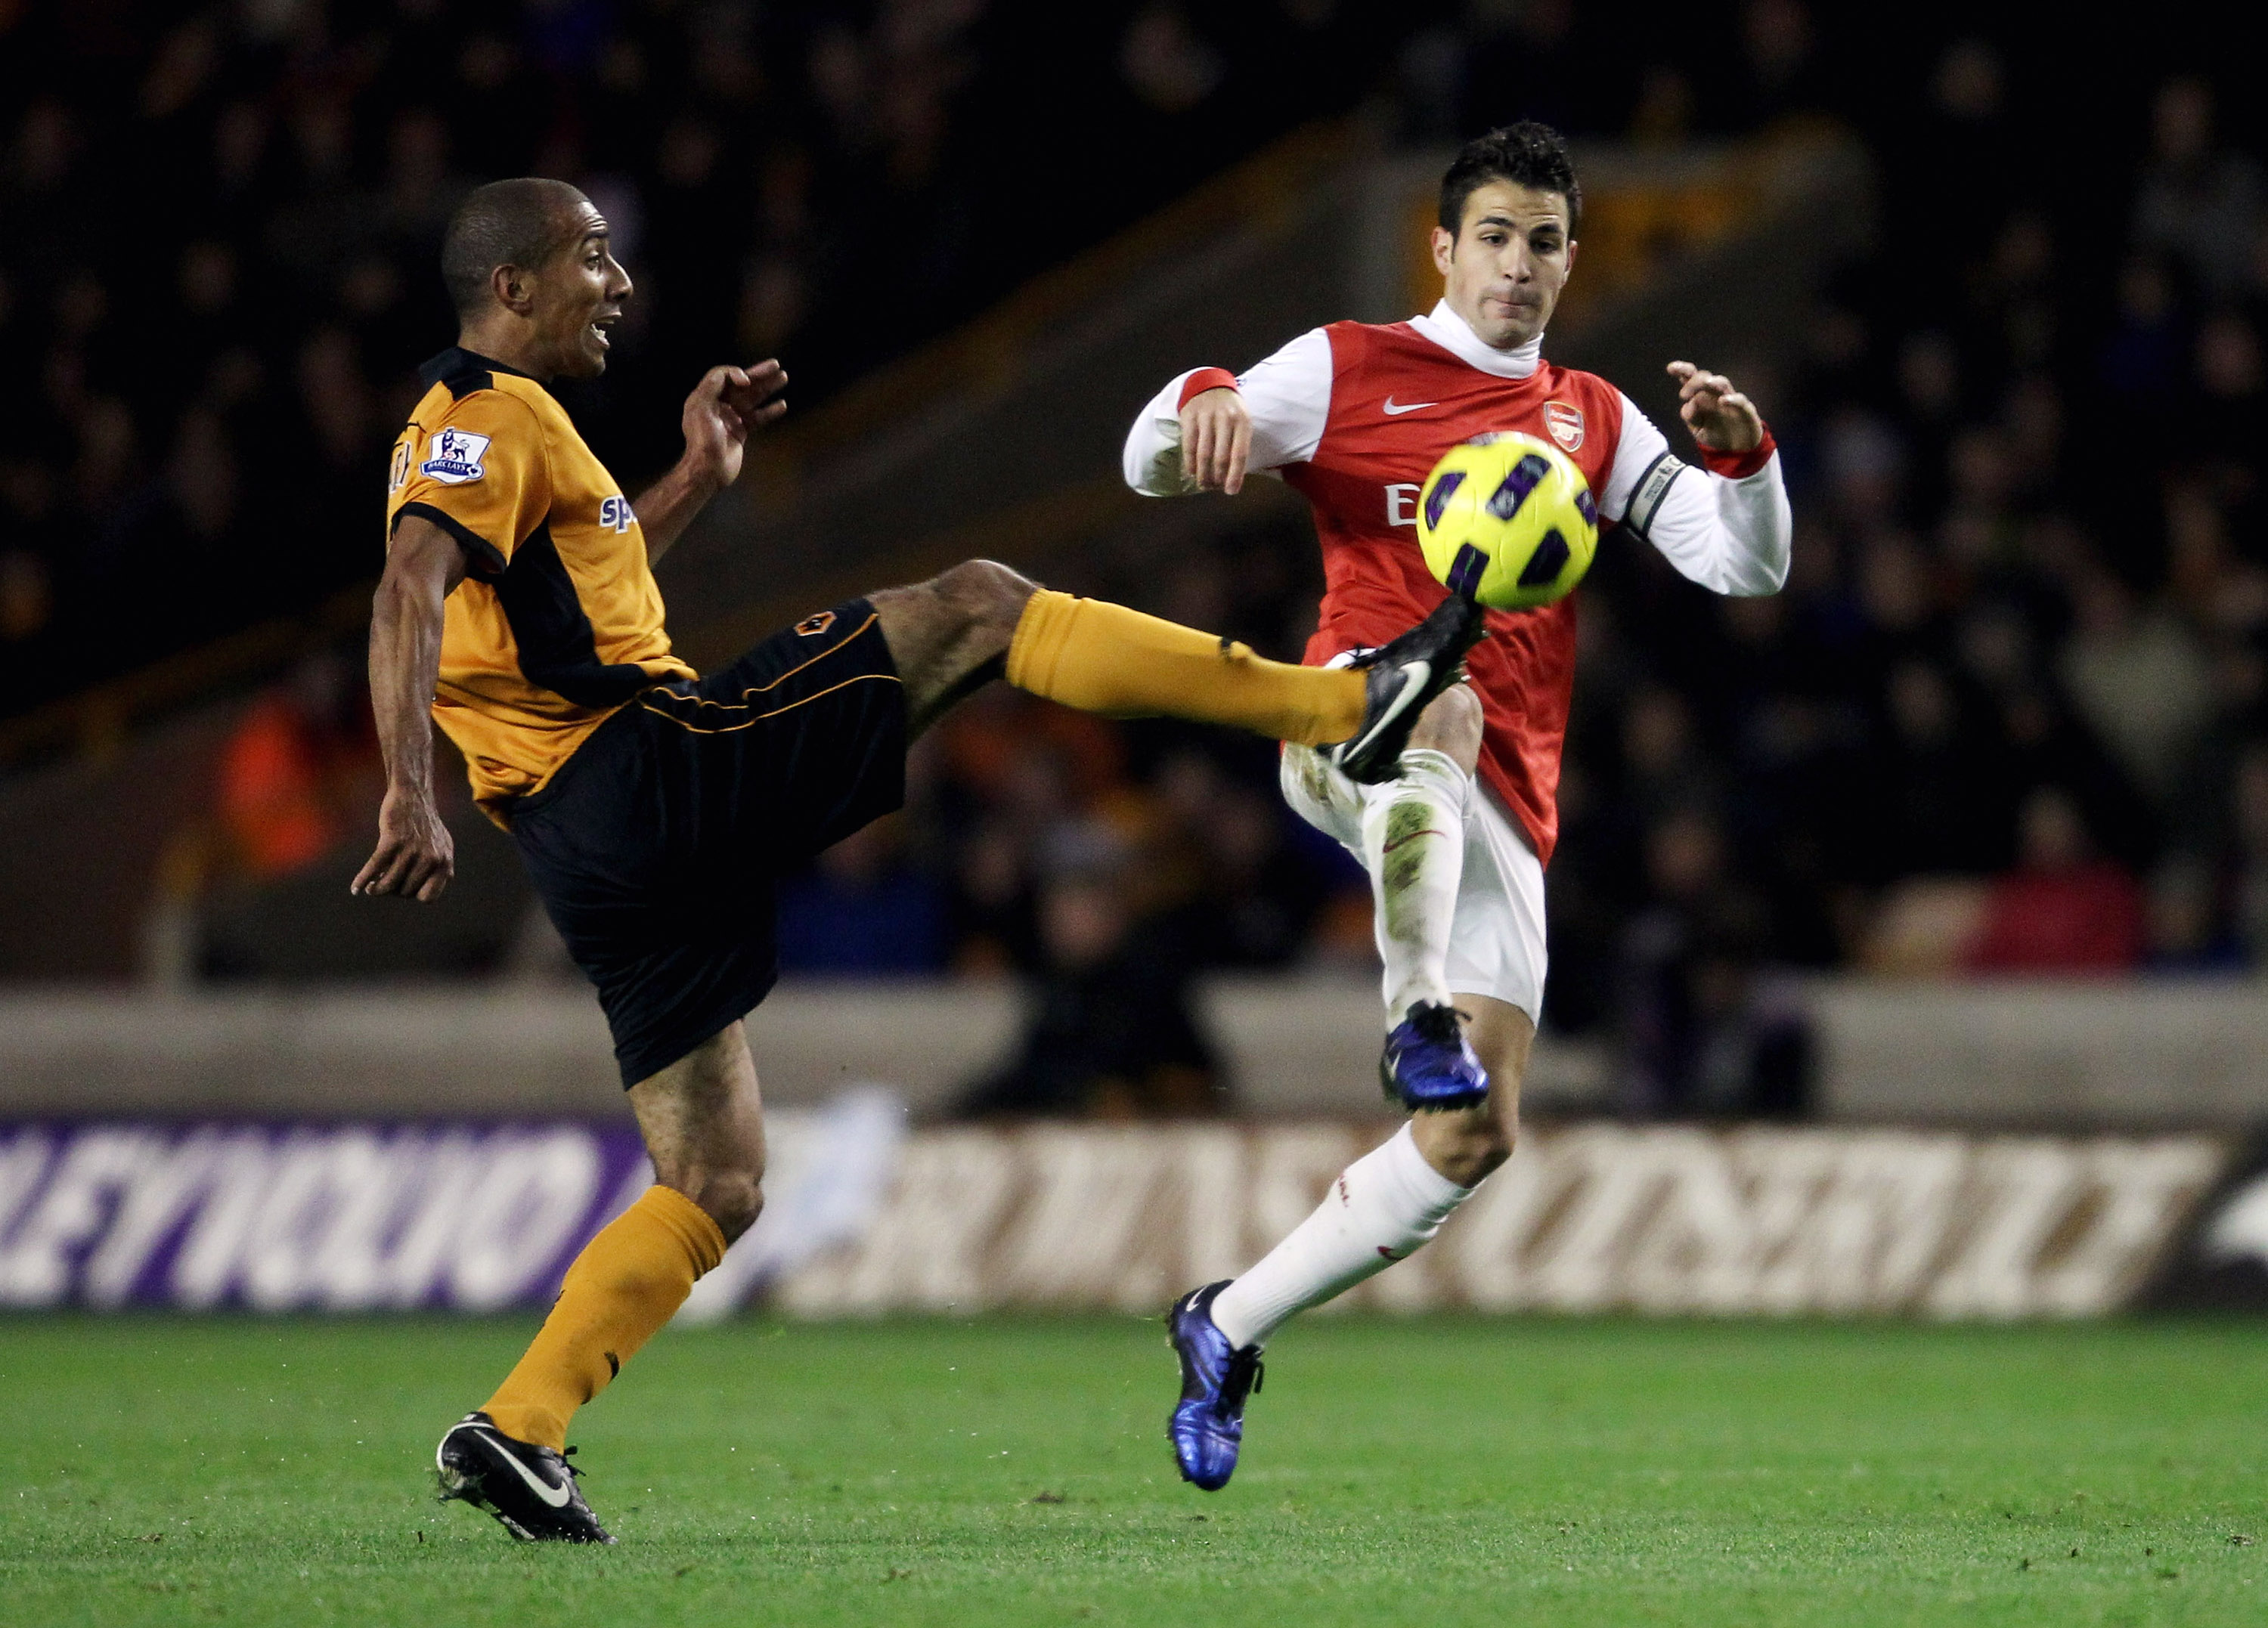 WOLVERHAMPTON, ENGLAND - NOVEMBER 10:  Karl Henry of Wolverhampton (L) in action with Cesc Fabregas of Arsenal during the Barclays Premier League match between Wolverhampton Wanderers and Arsenal, at Molineux on November 10, 2010 in Wolverhampton, England